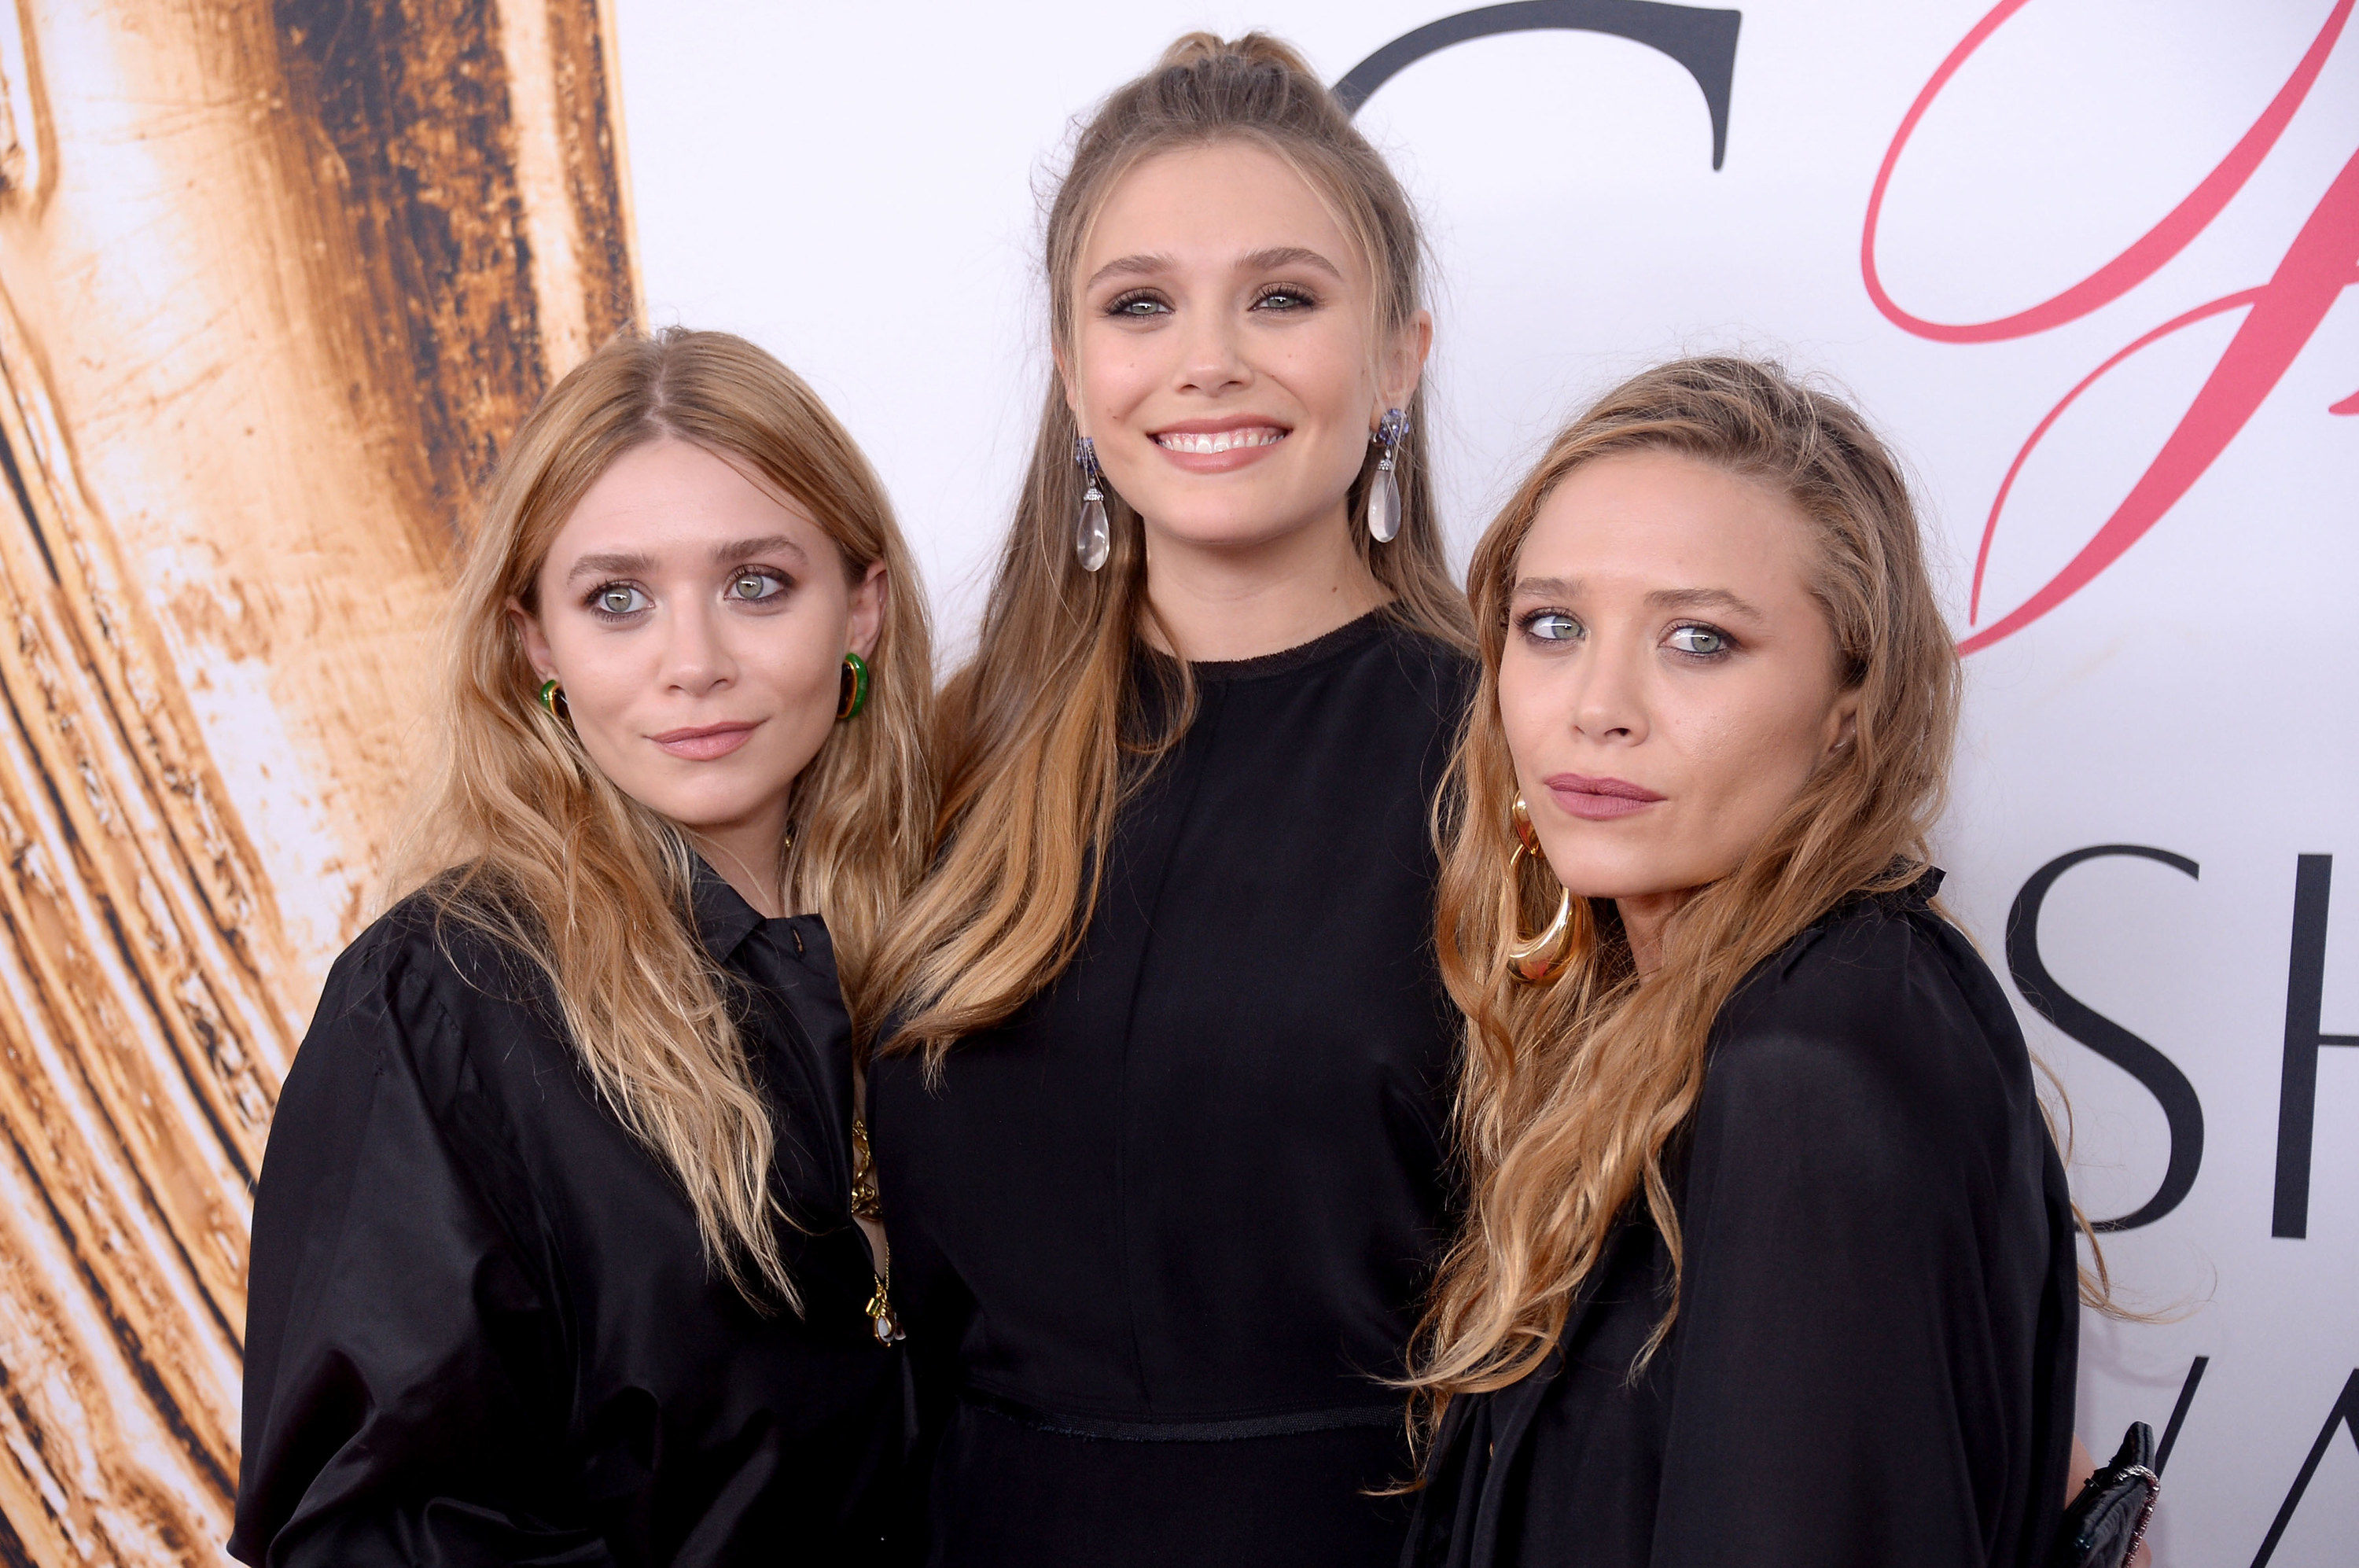 Ashley, Elizabeth and Mary Kate Olsen at an event. They are all wearing black high neck outfits